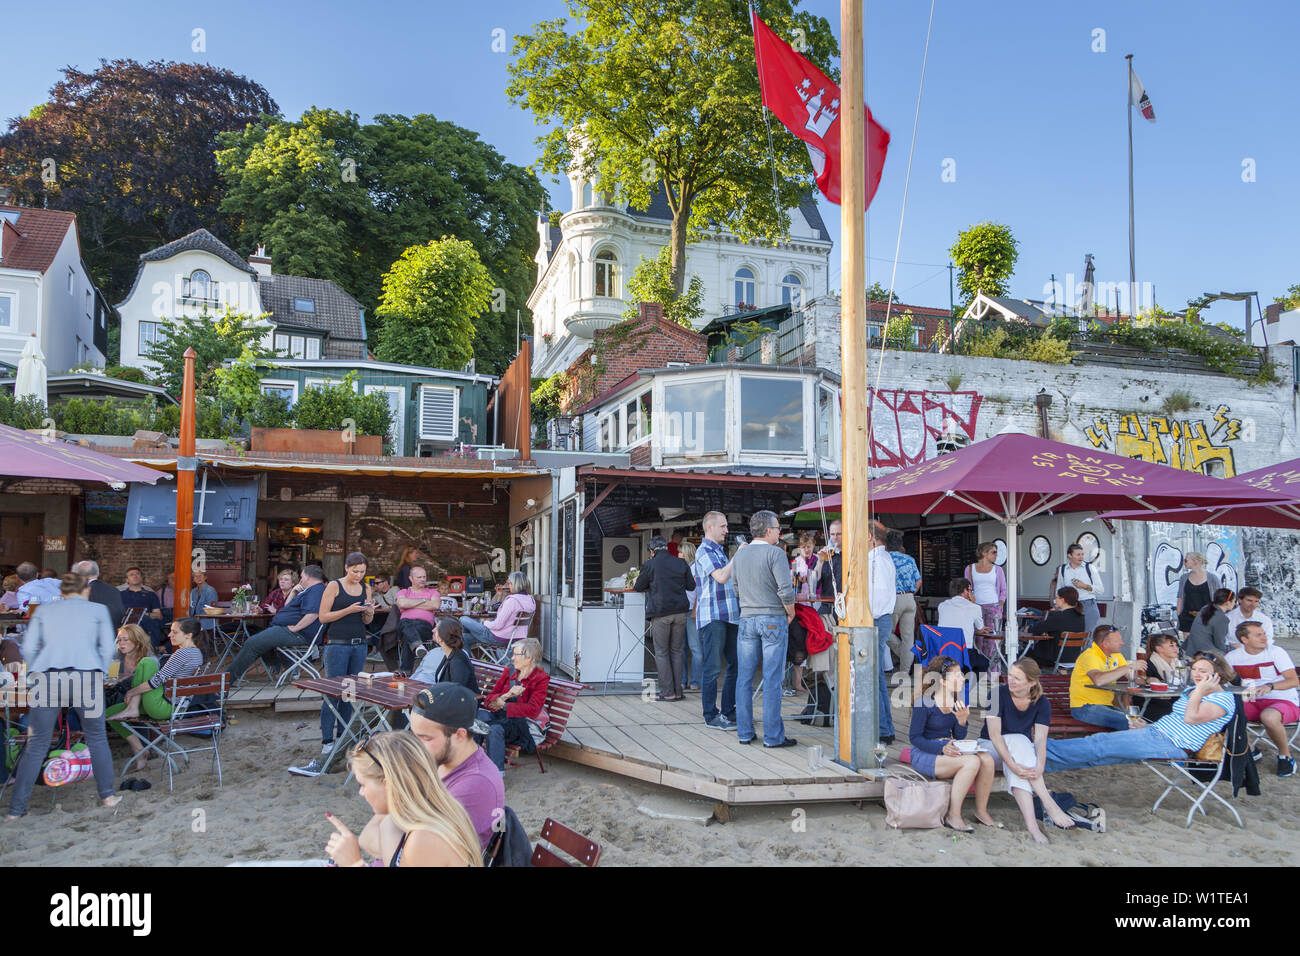 Beach in front of the bar Strandperle by the river Elbe, district Övelgönne, Hanseatic City of Hamburg, Northern Germany, Germany, Europe Stock Photo